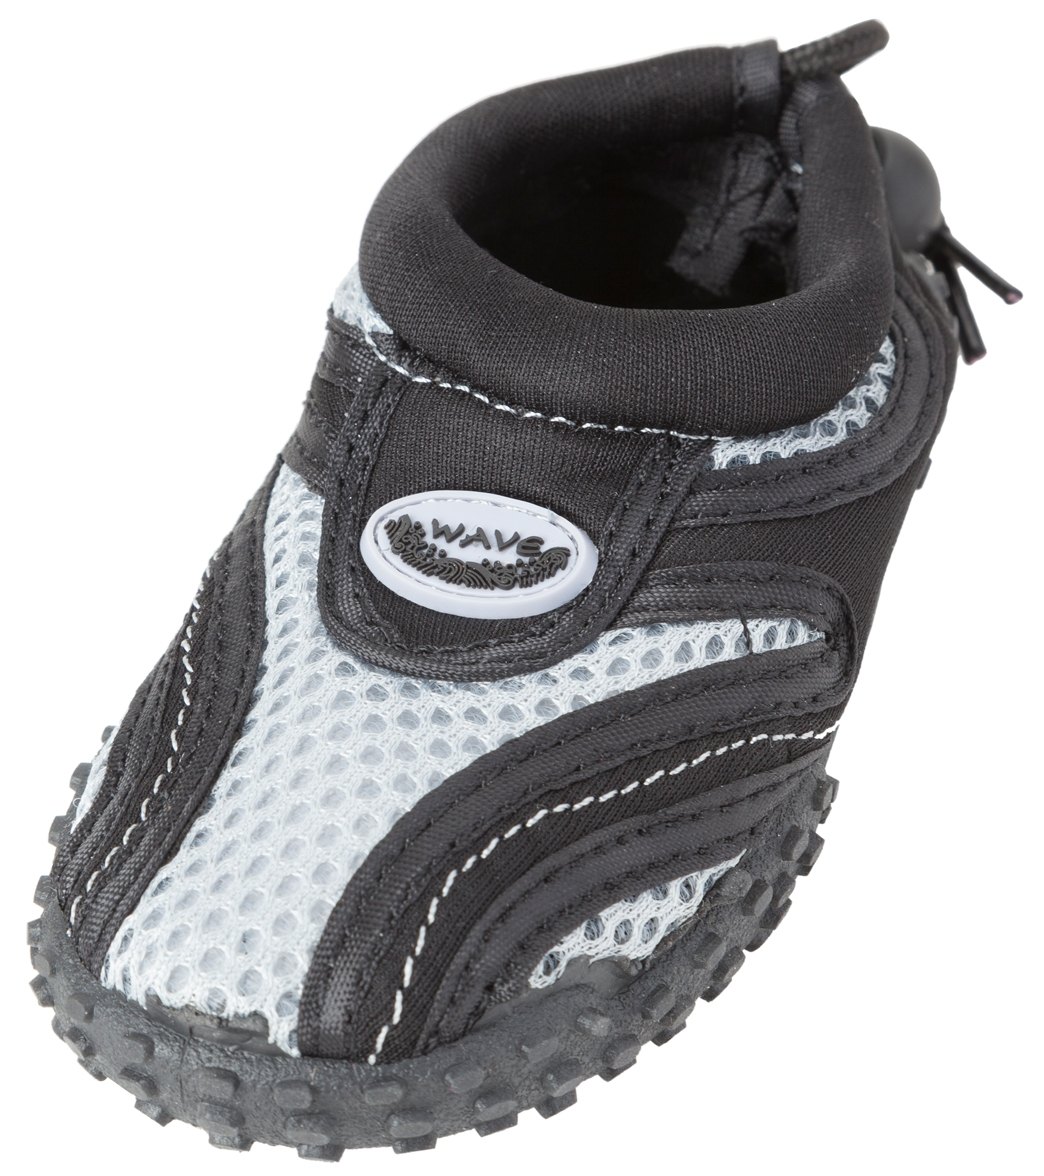 Easy Usa Infants Water Shoes - Black/Grey 5 - Swimoutlet.com